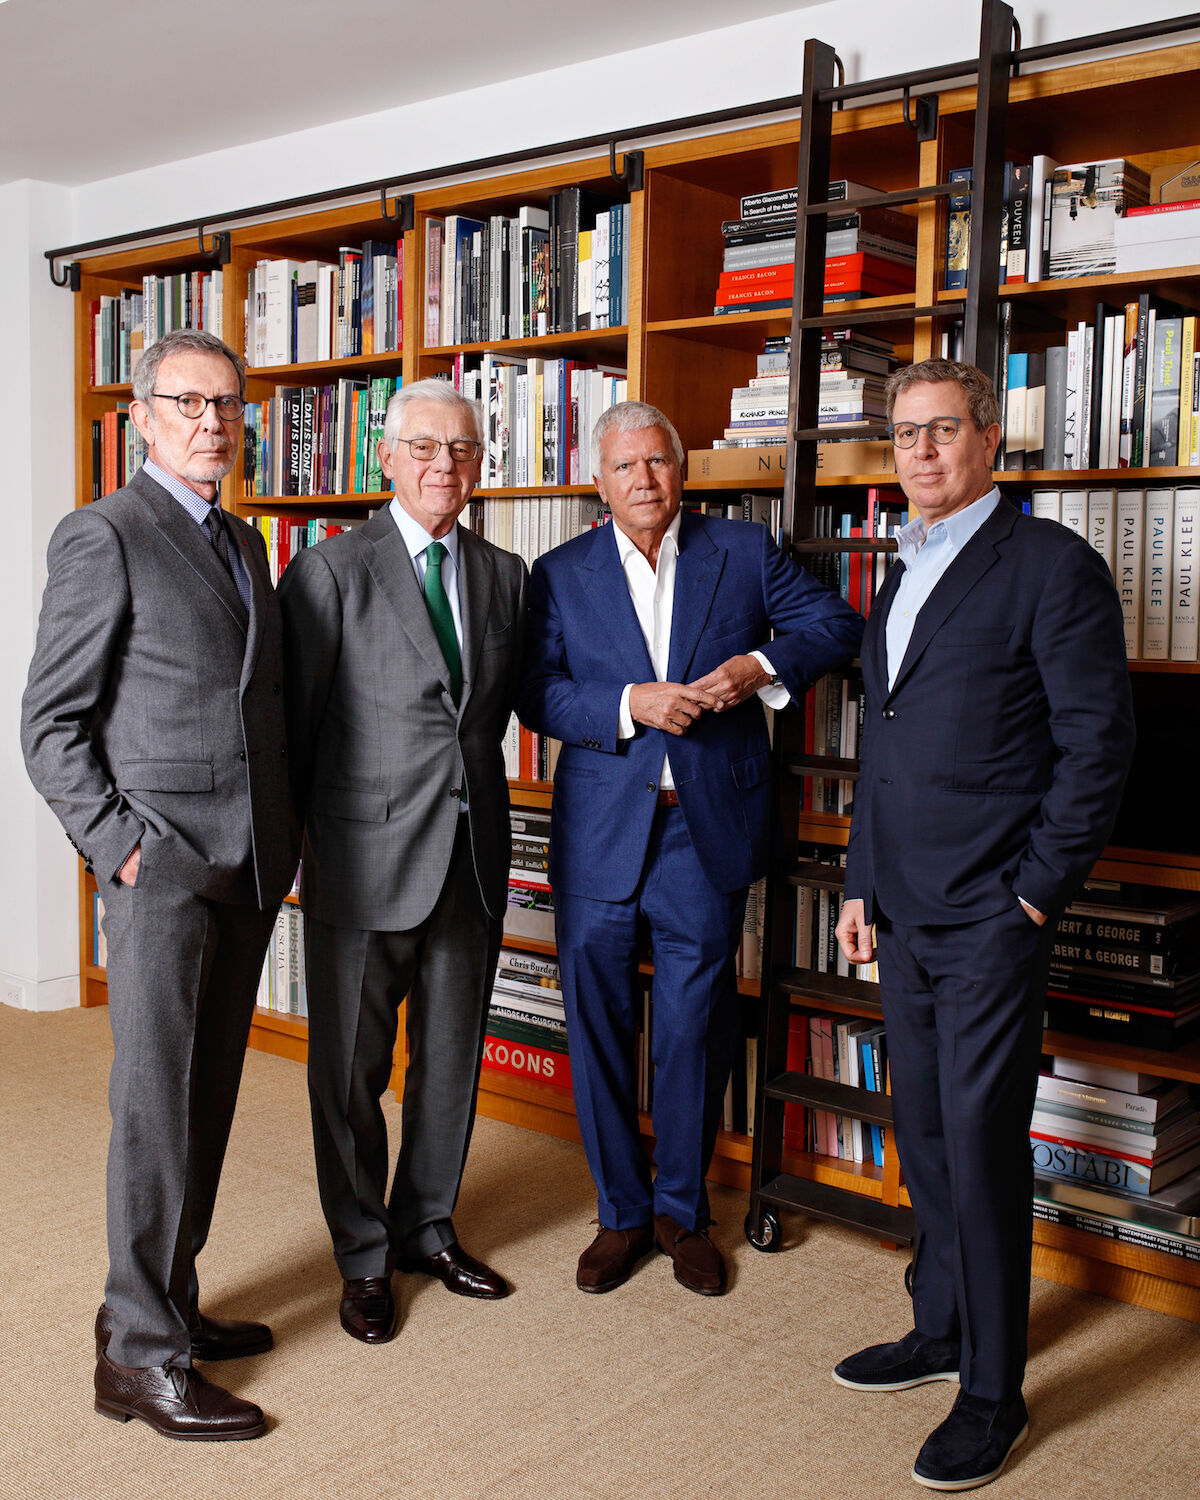 From left to right: Arne Glimcher, Bill Acquavella, Larry Gagosian, and Marc Glimcher. Photo © Axel Dupeux.